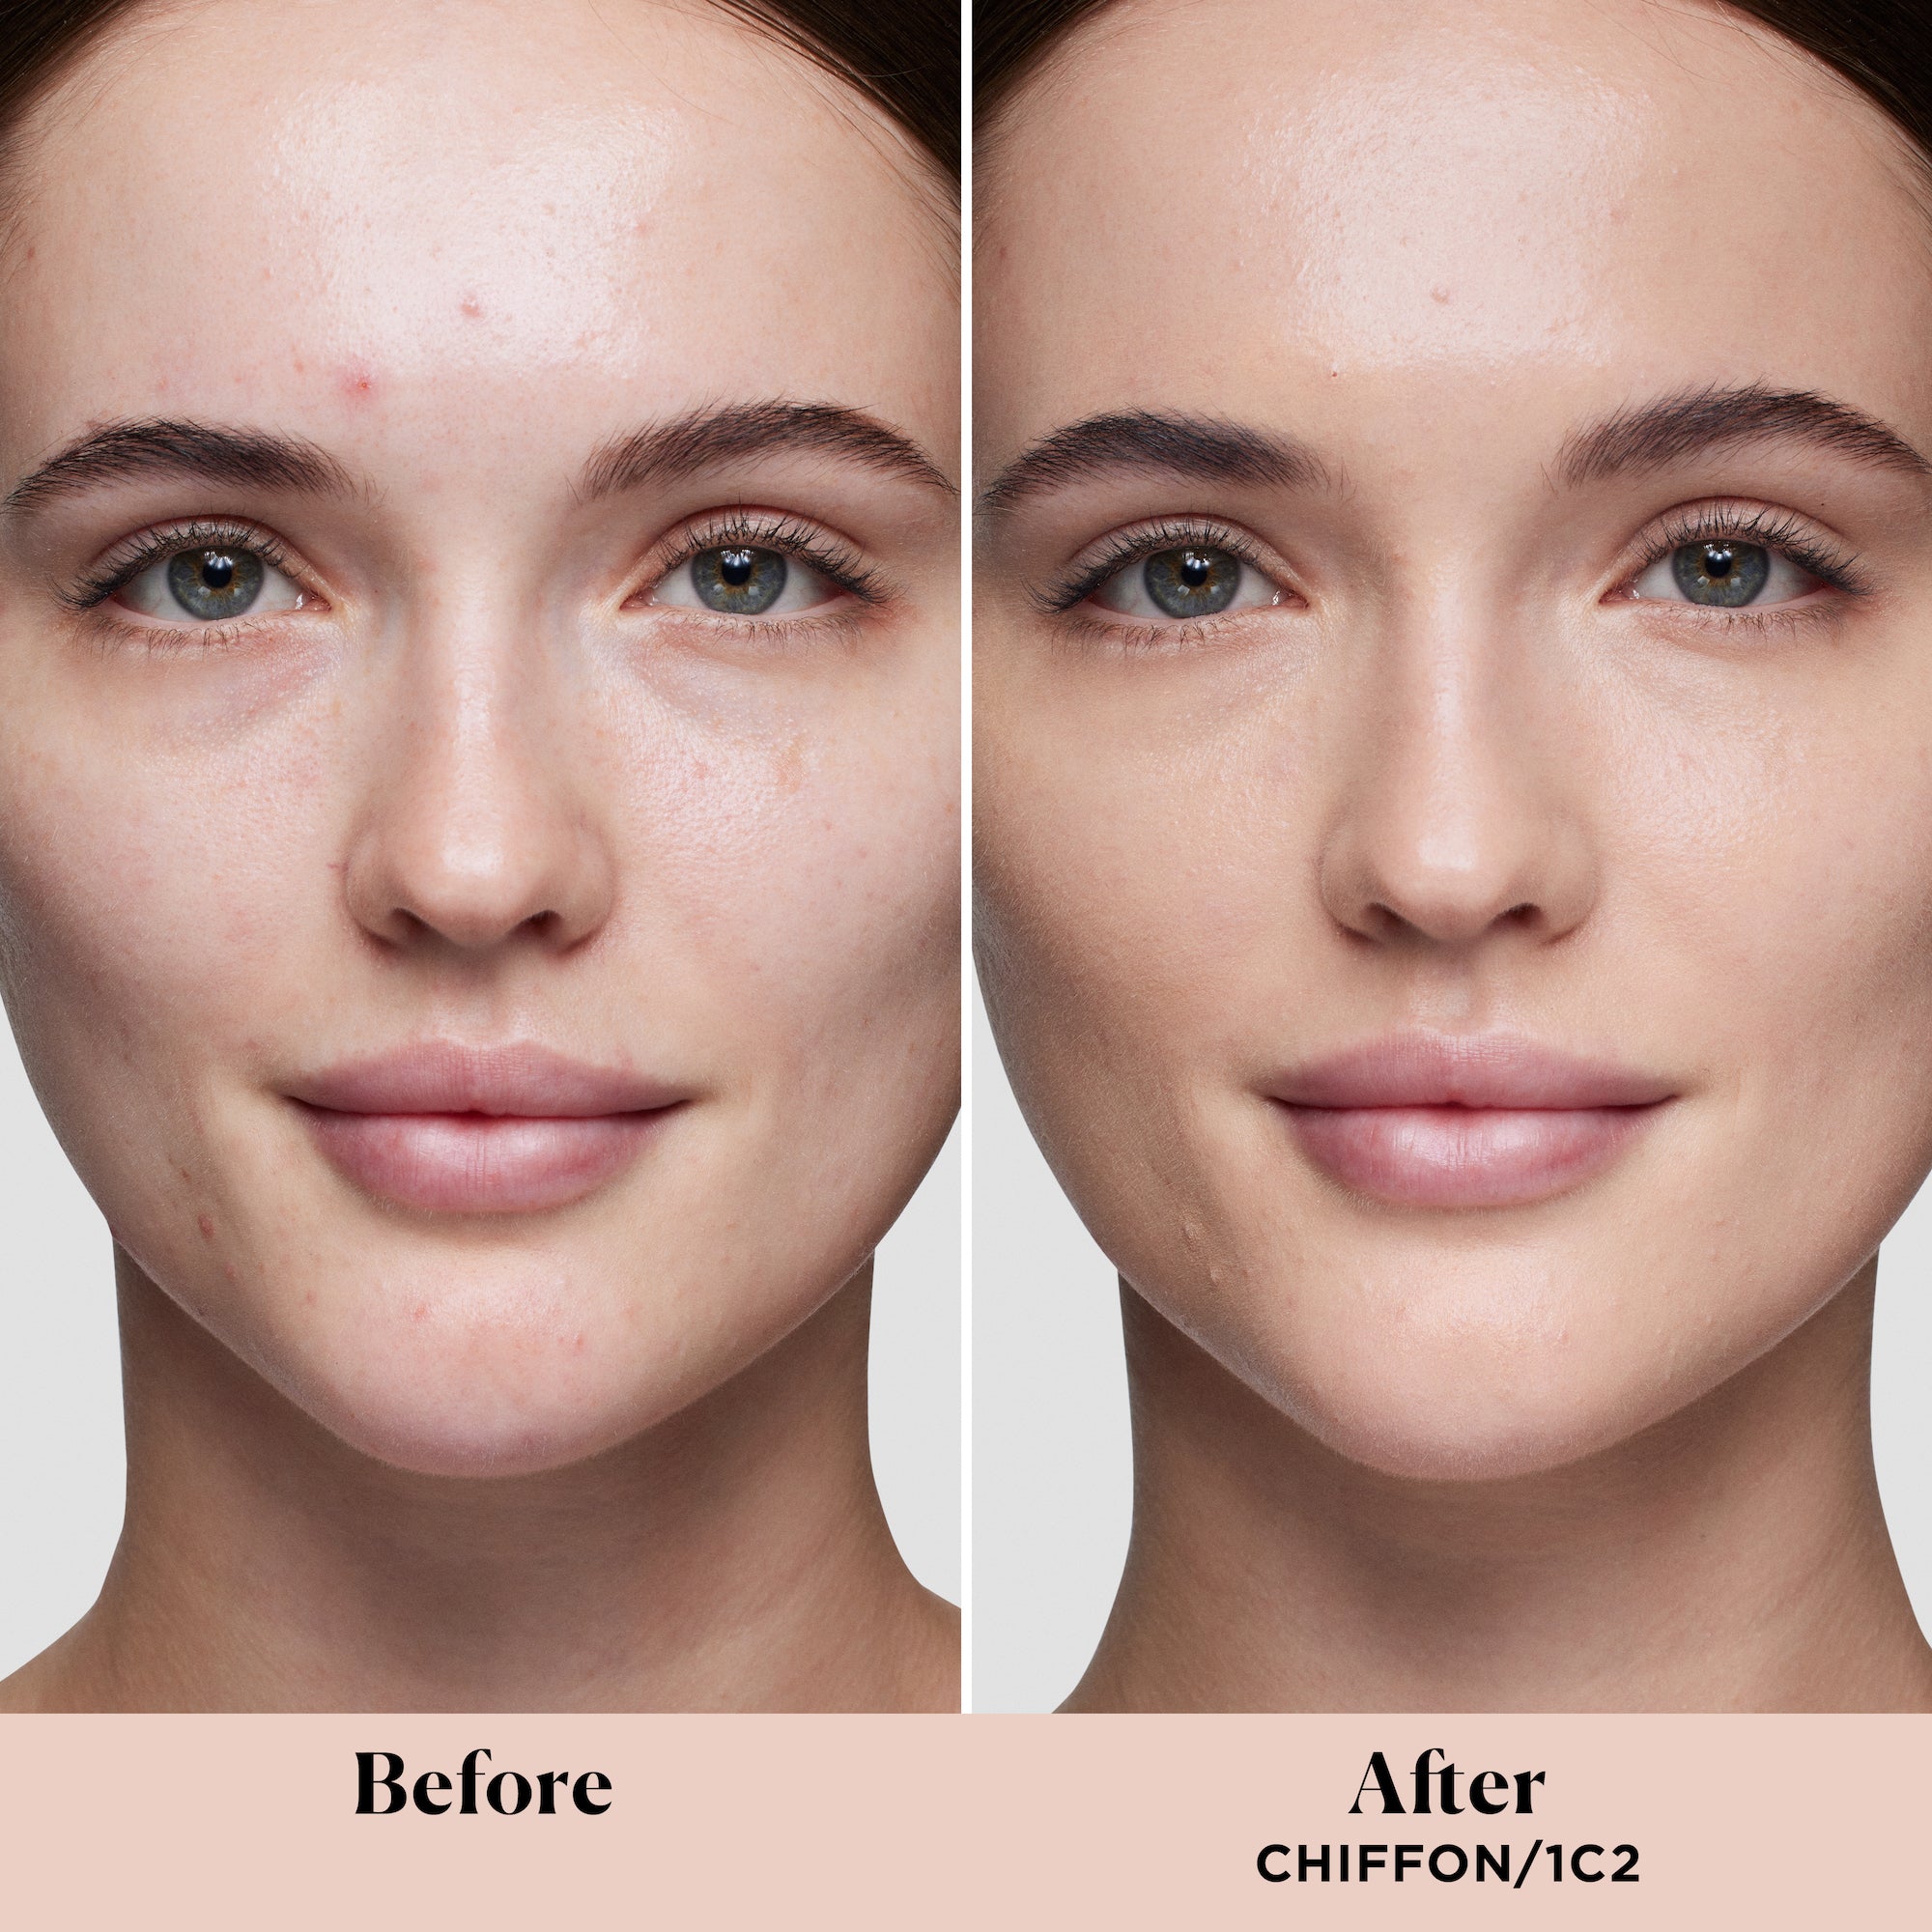 Real Flawless Weightless Perfecting Waterproof Foundation View 2